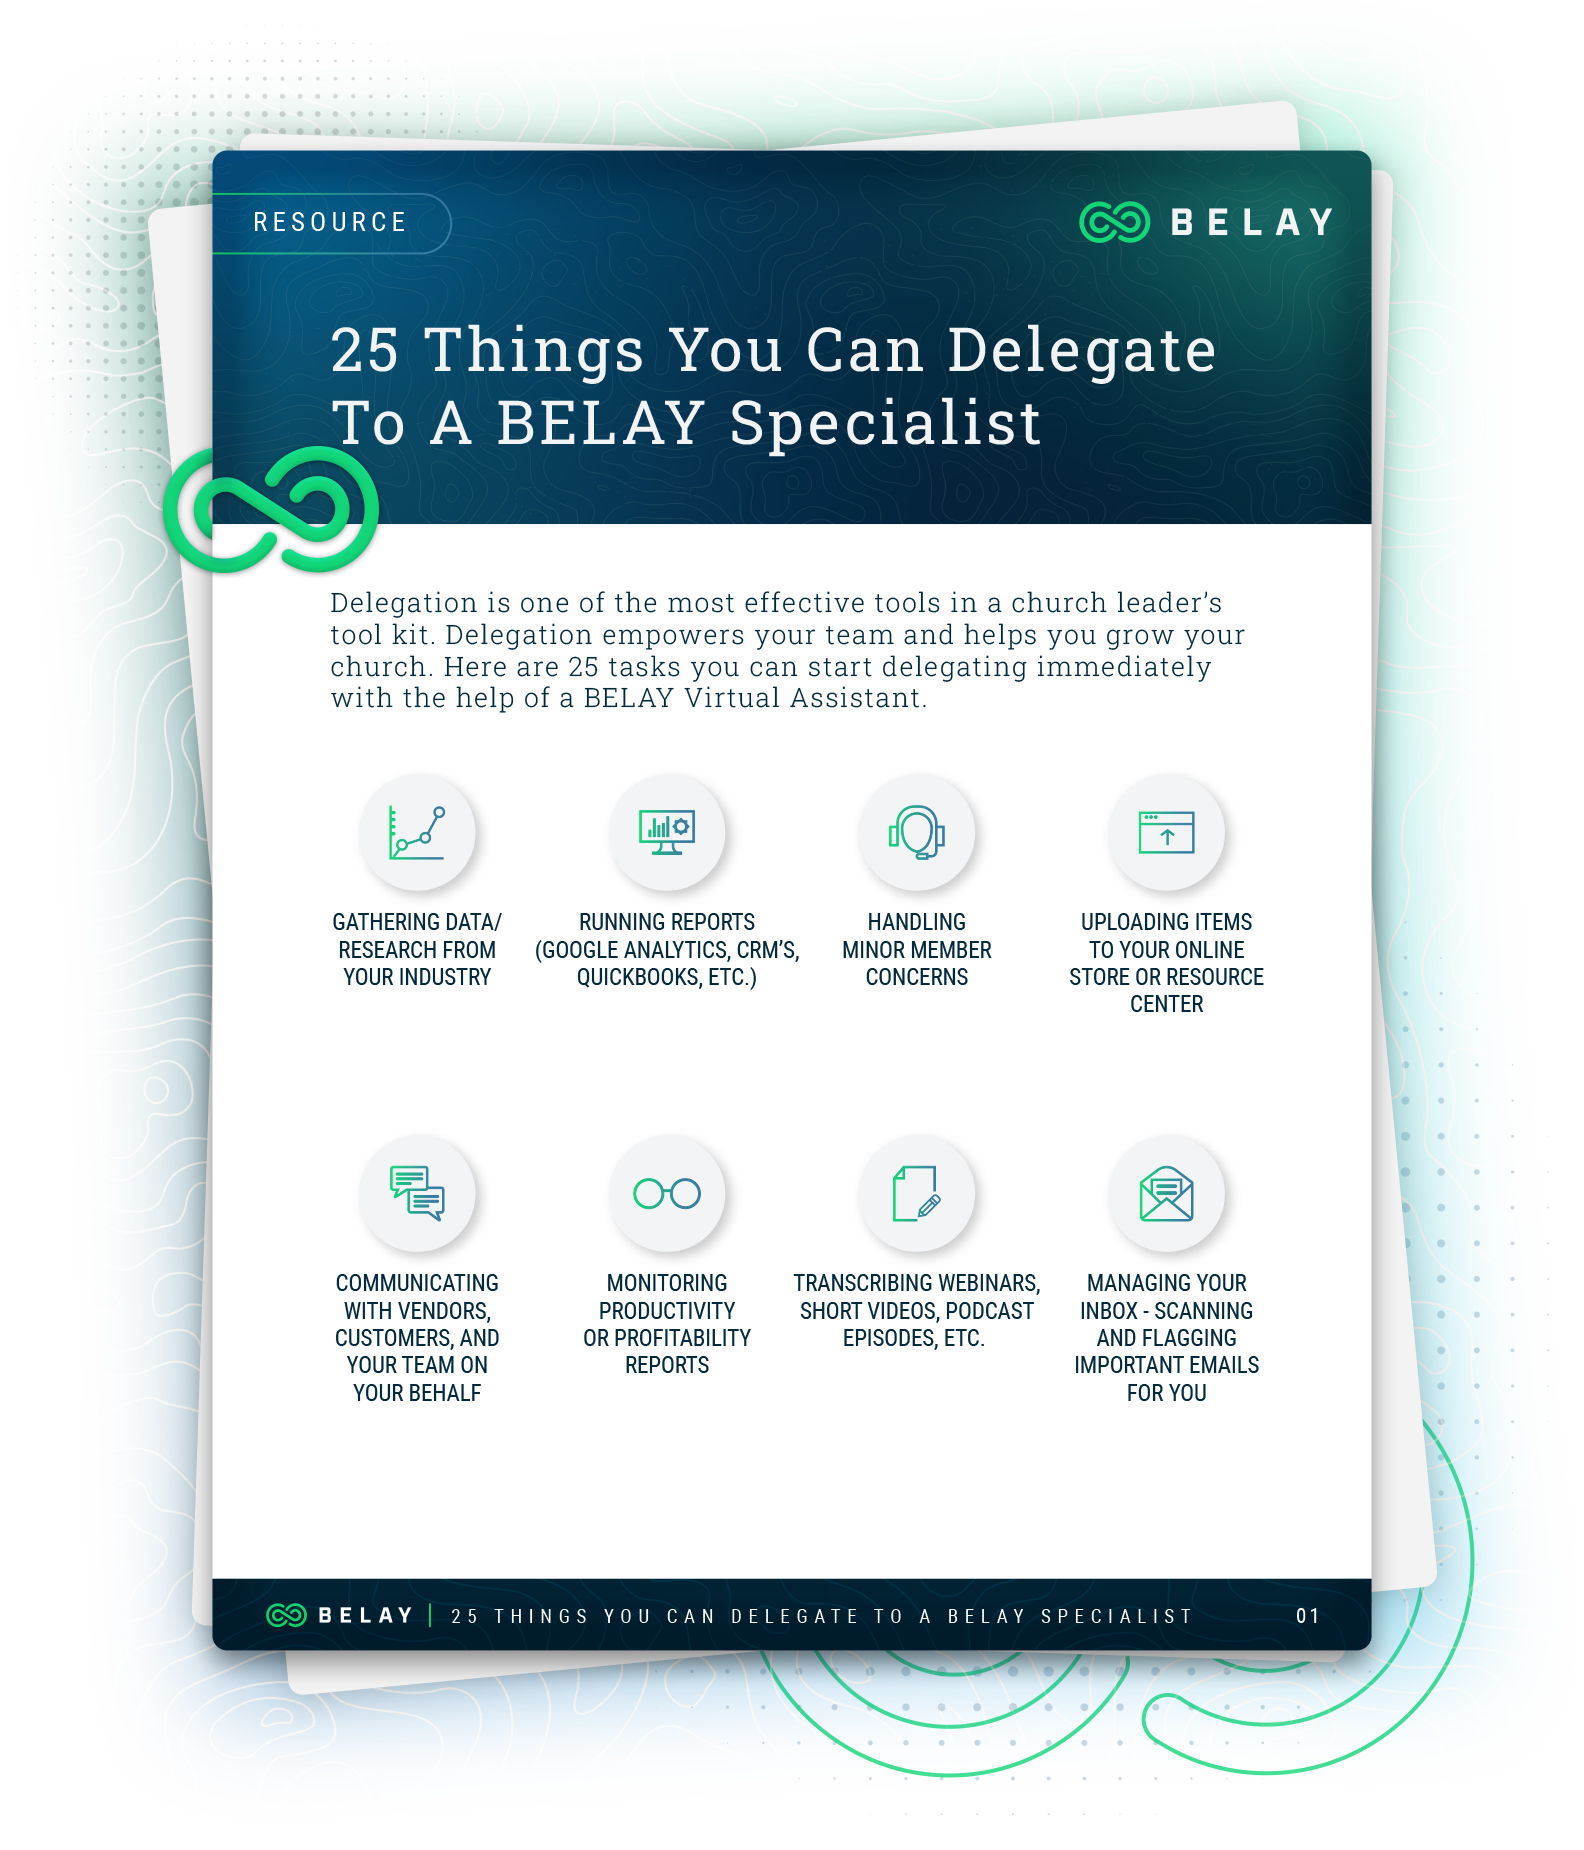 25 Things You Can Delegate To A BELAY Specialist